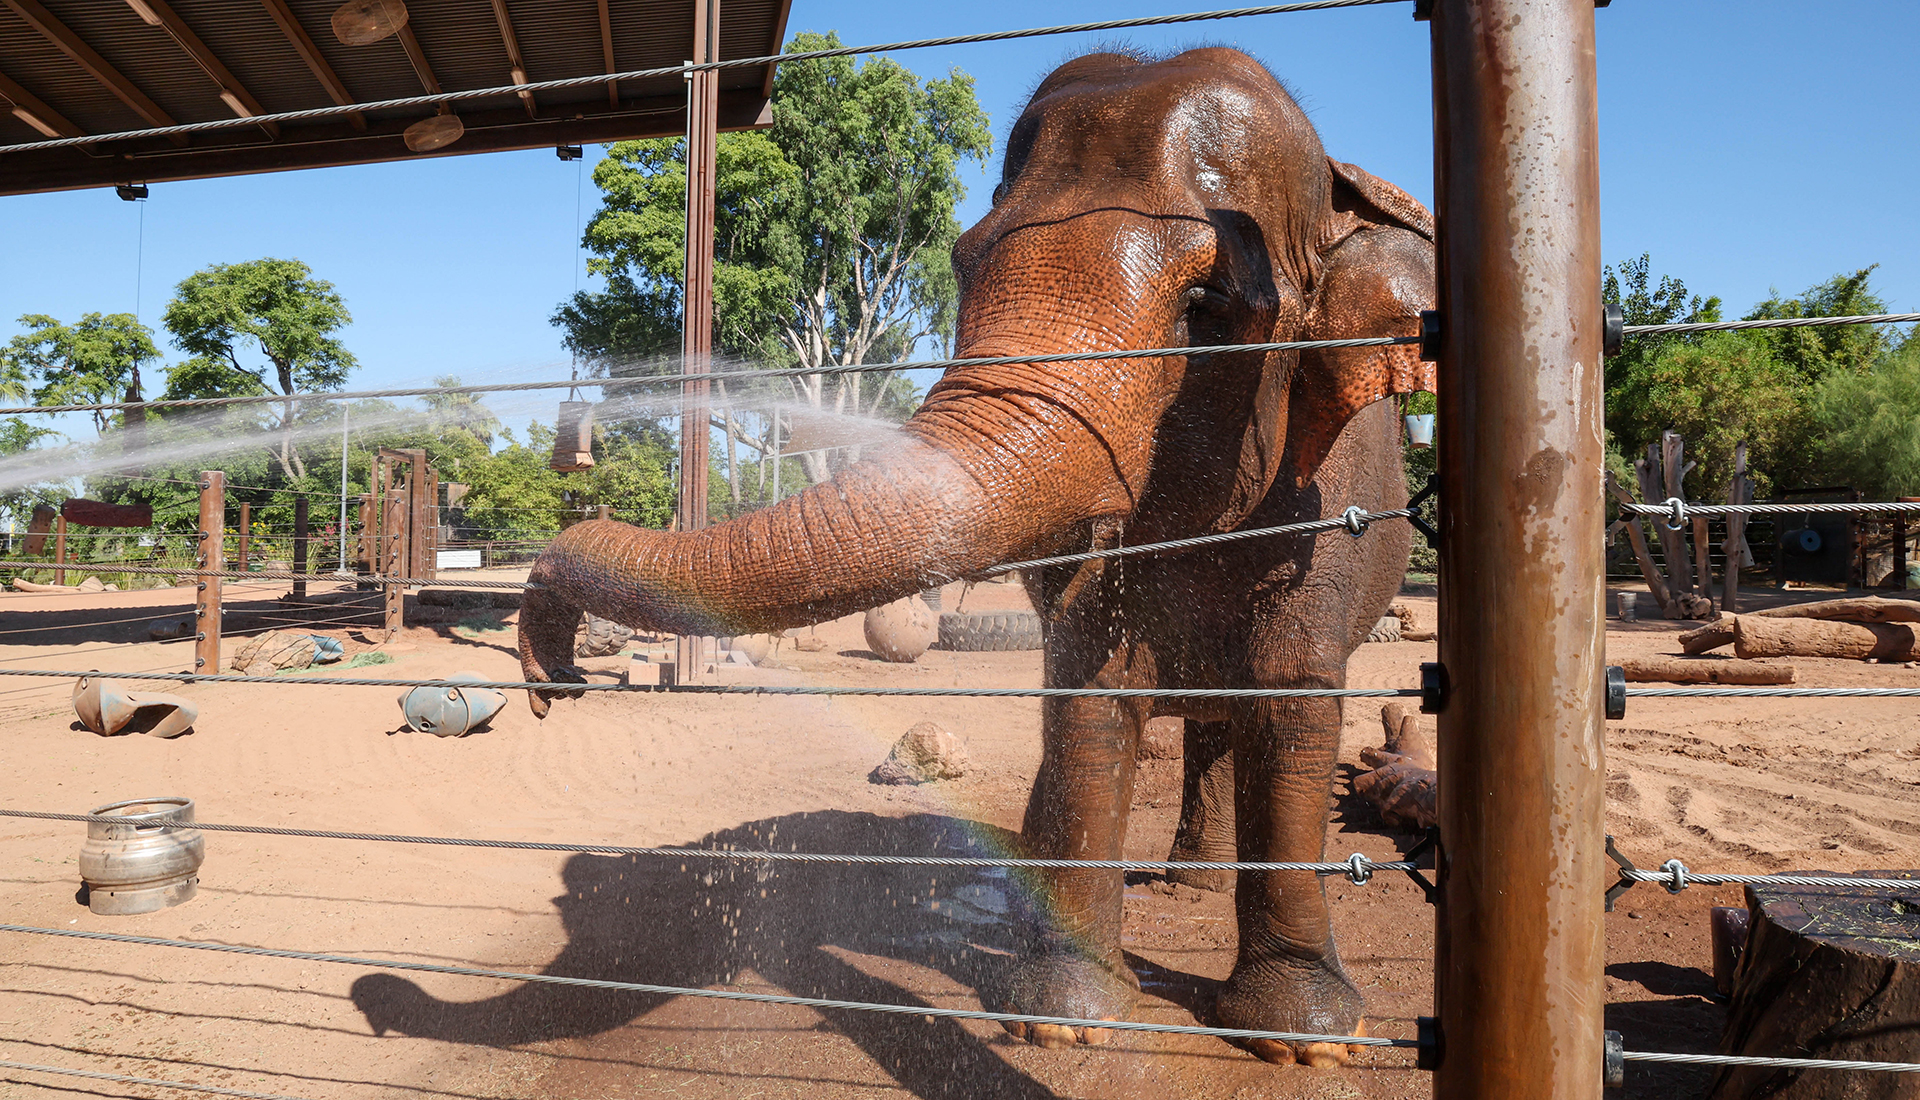 Indu, a 57-year old Asian elephant, enjoys a frozen treat and bath at the Phoenix Zoo. (Photo by Evelin Ruelas/Cronkite News)
